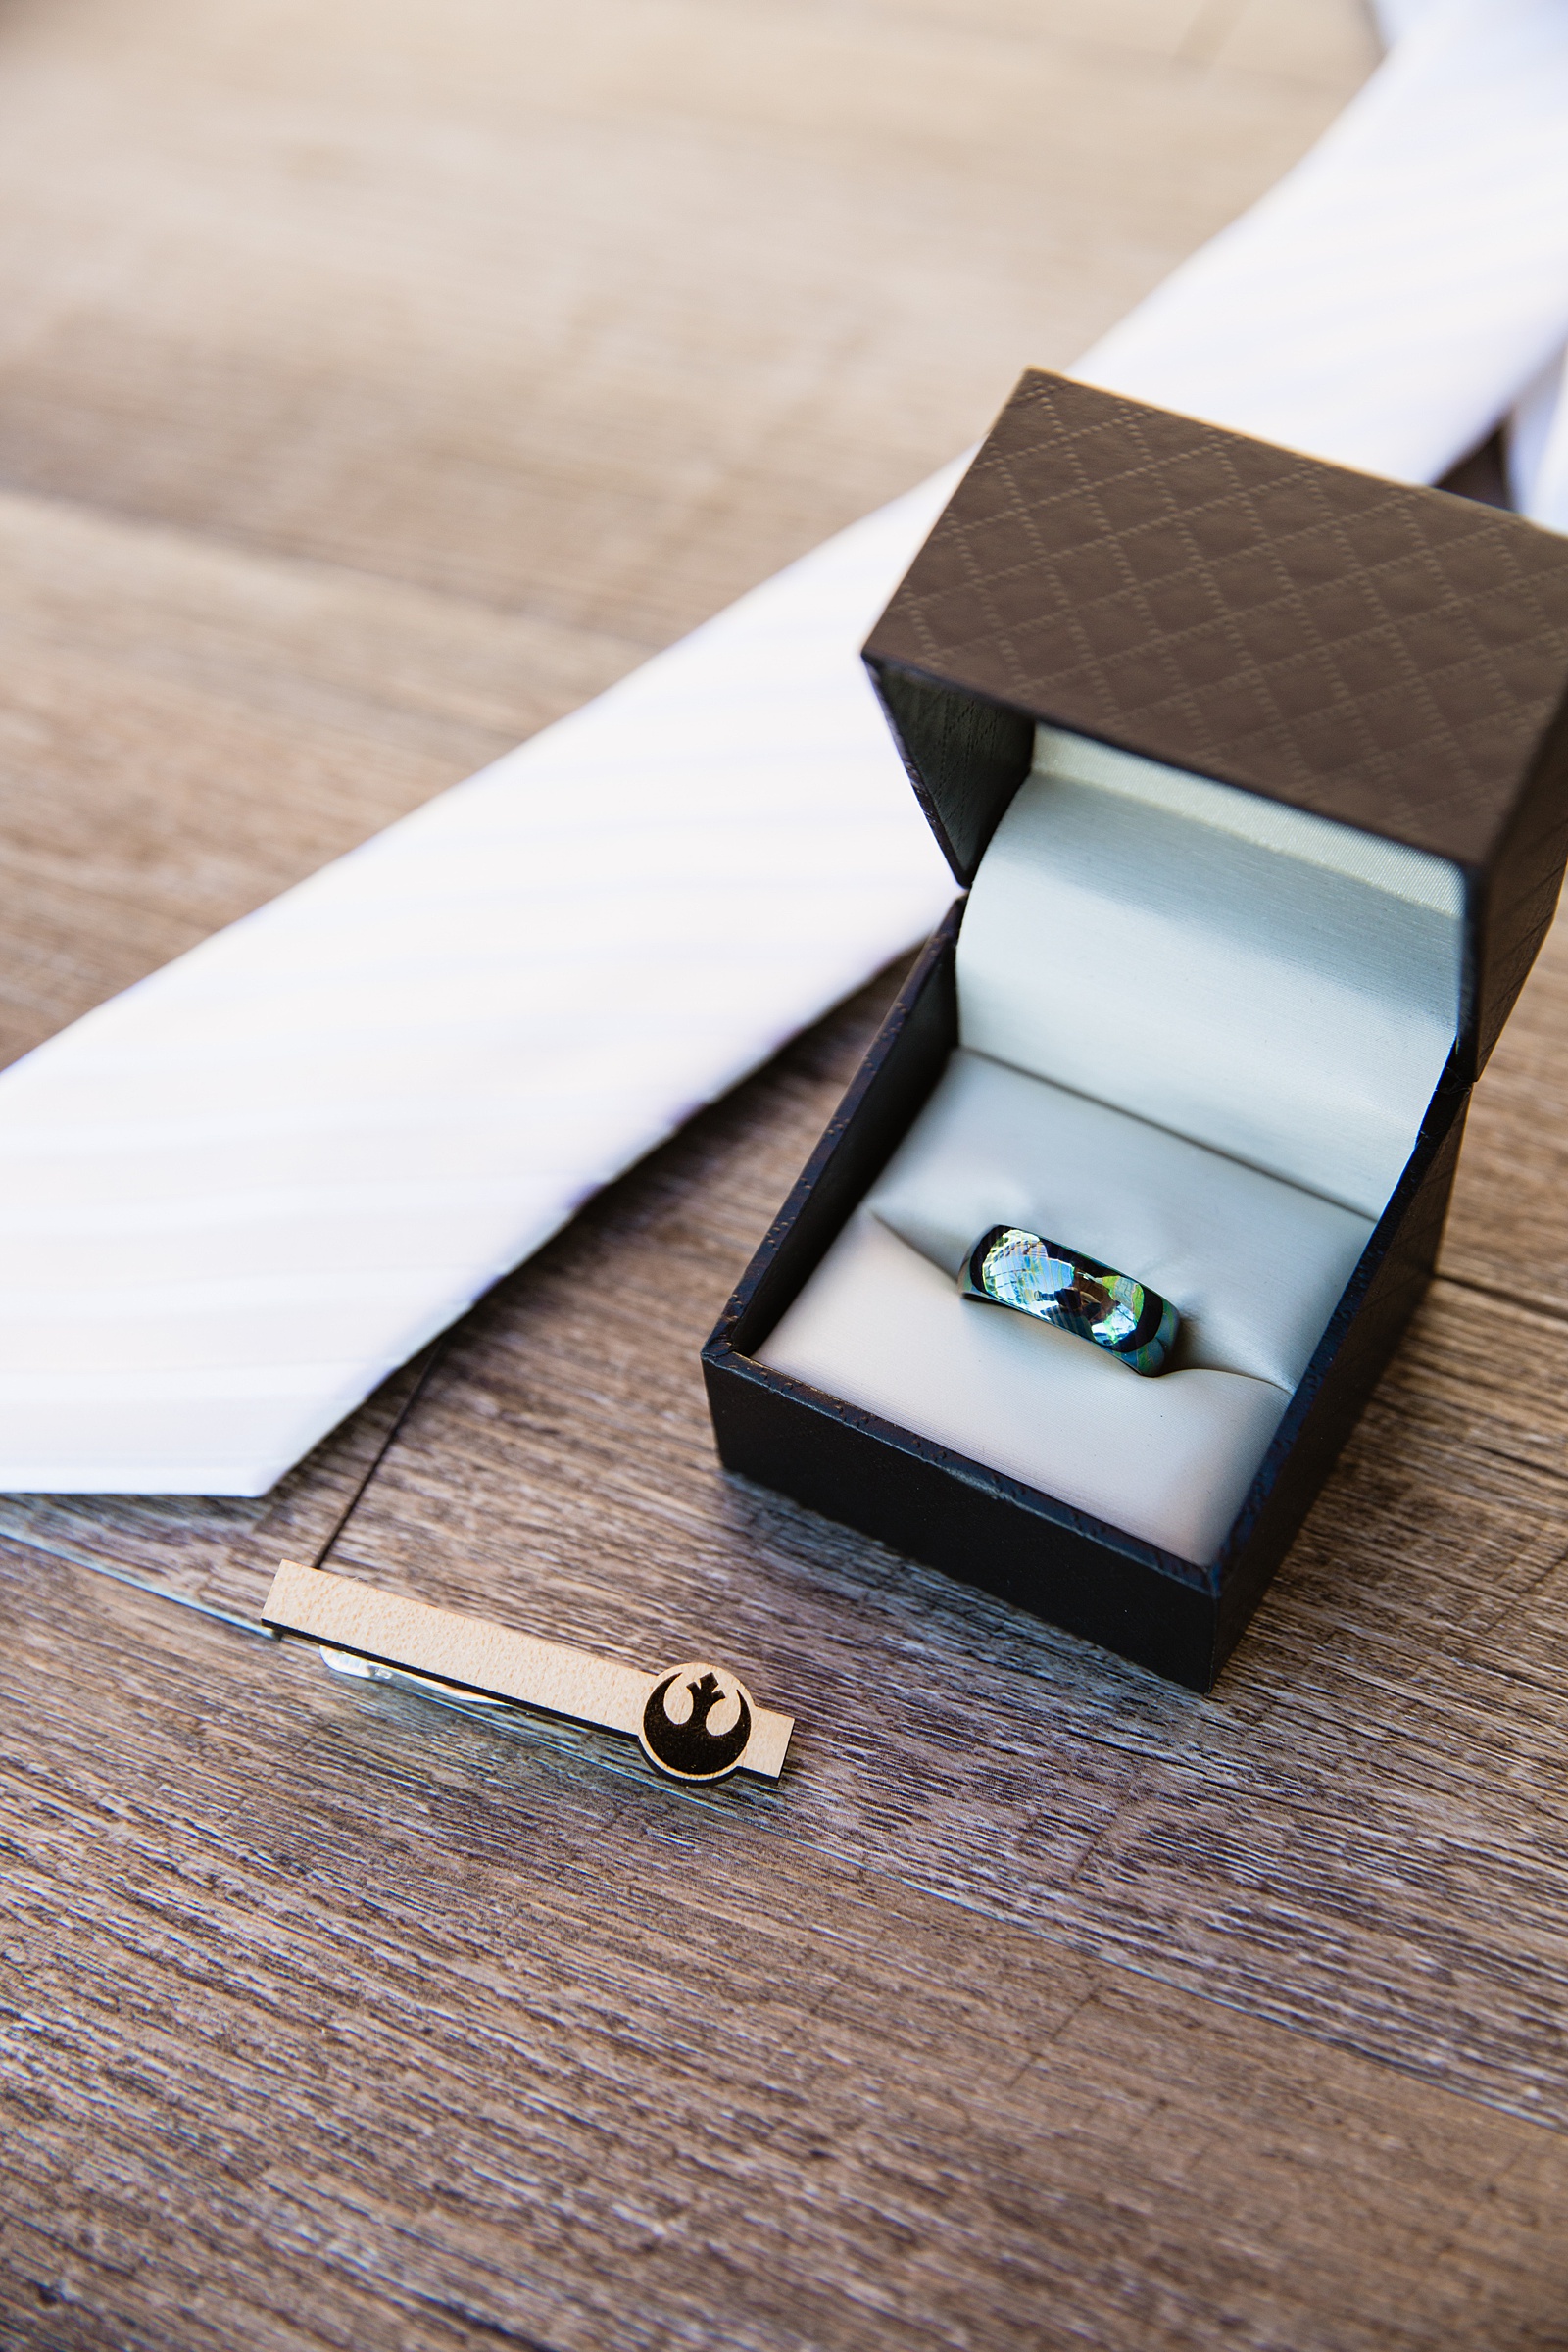 Grooms wedding day details with a white tie, Star Wars tie clip, and blue metal wedding band by Phoenix wedding photographer PMA Photography.